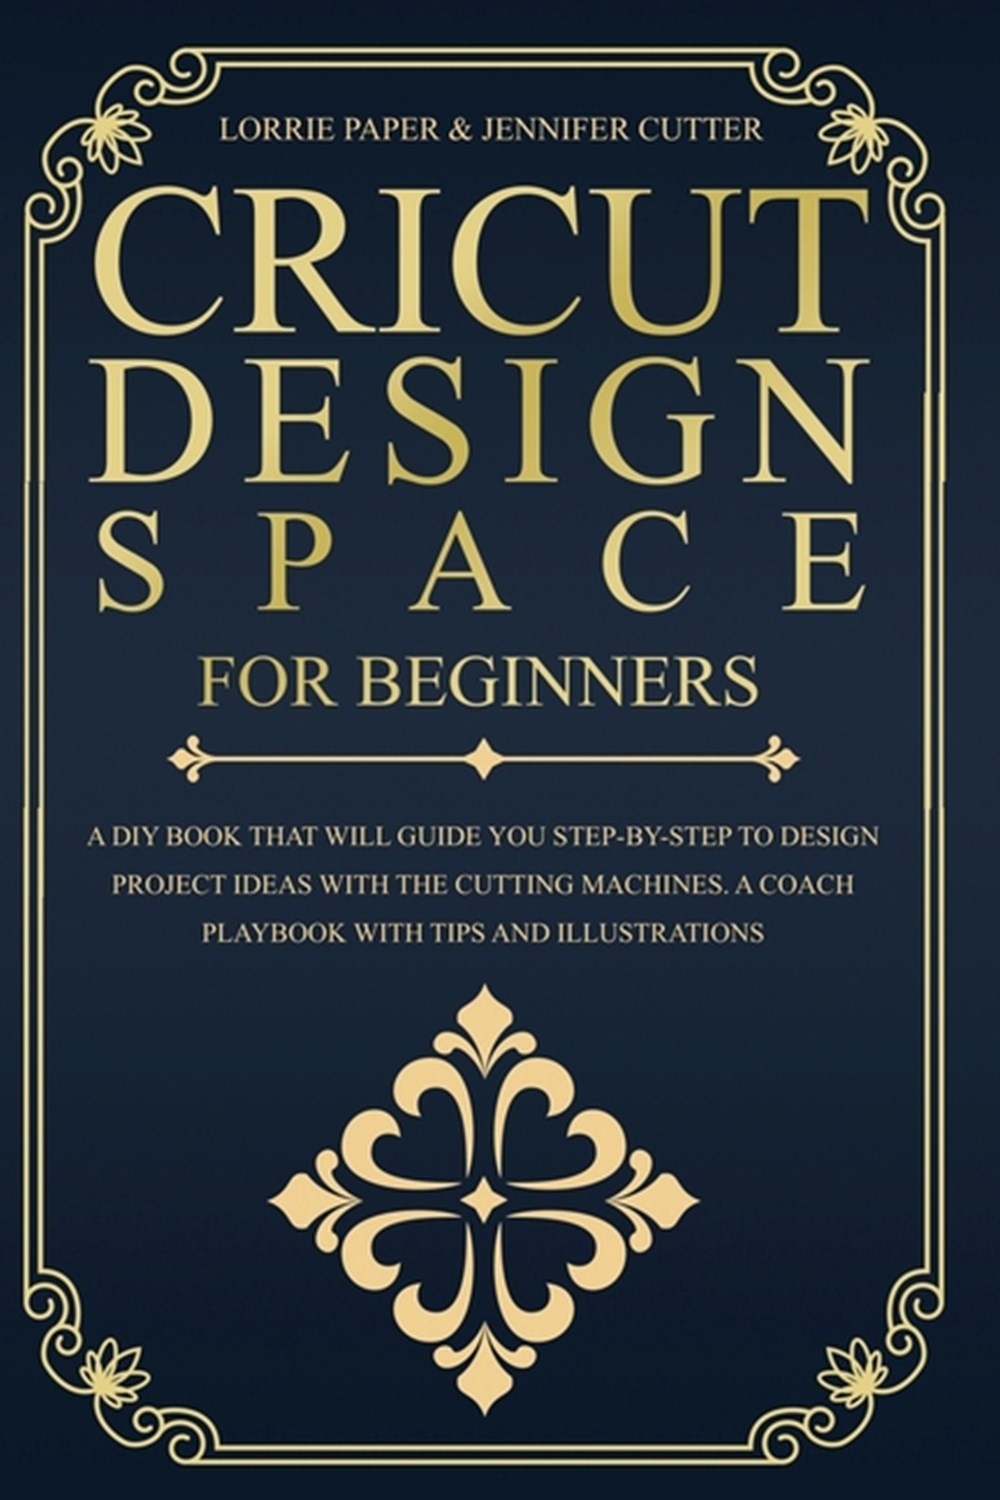 Cricut Machines for absolute beginners